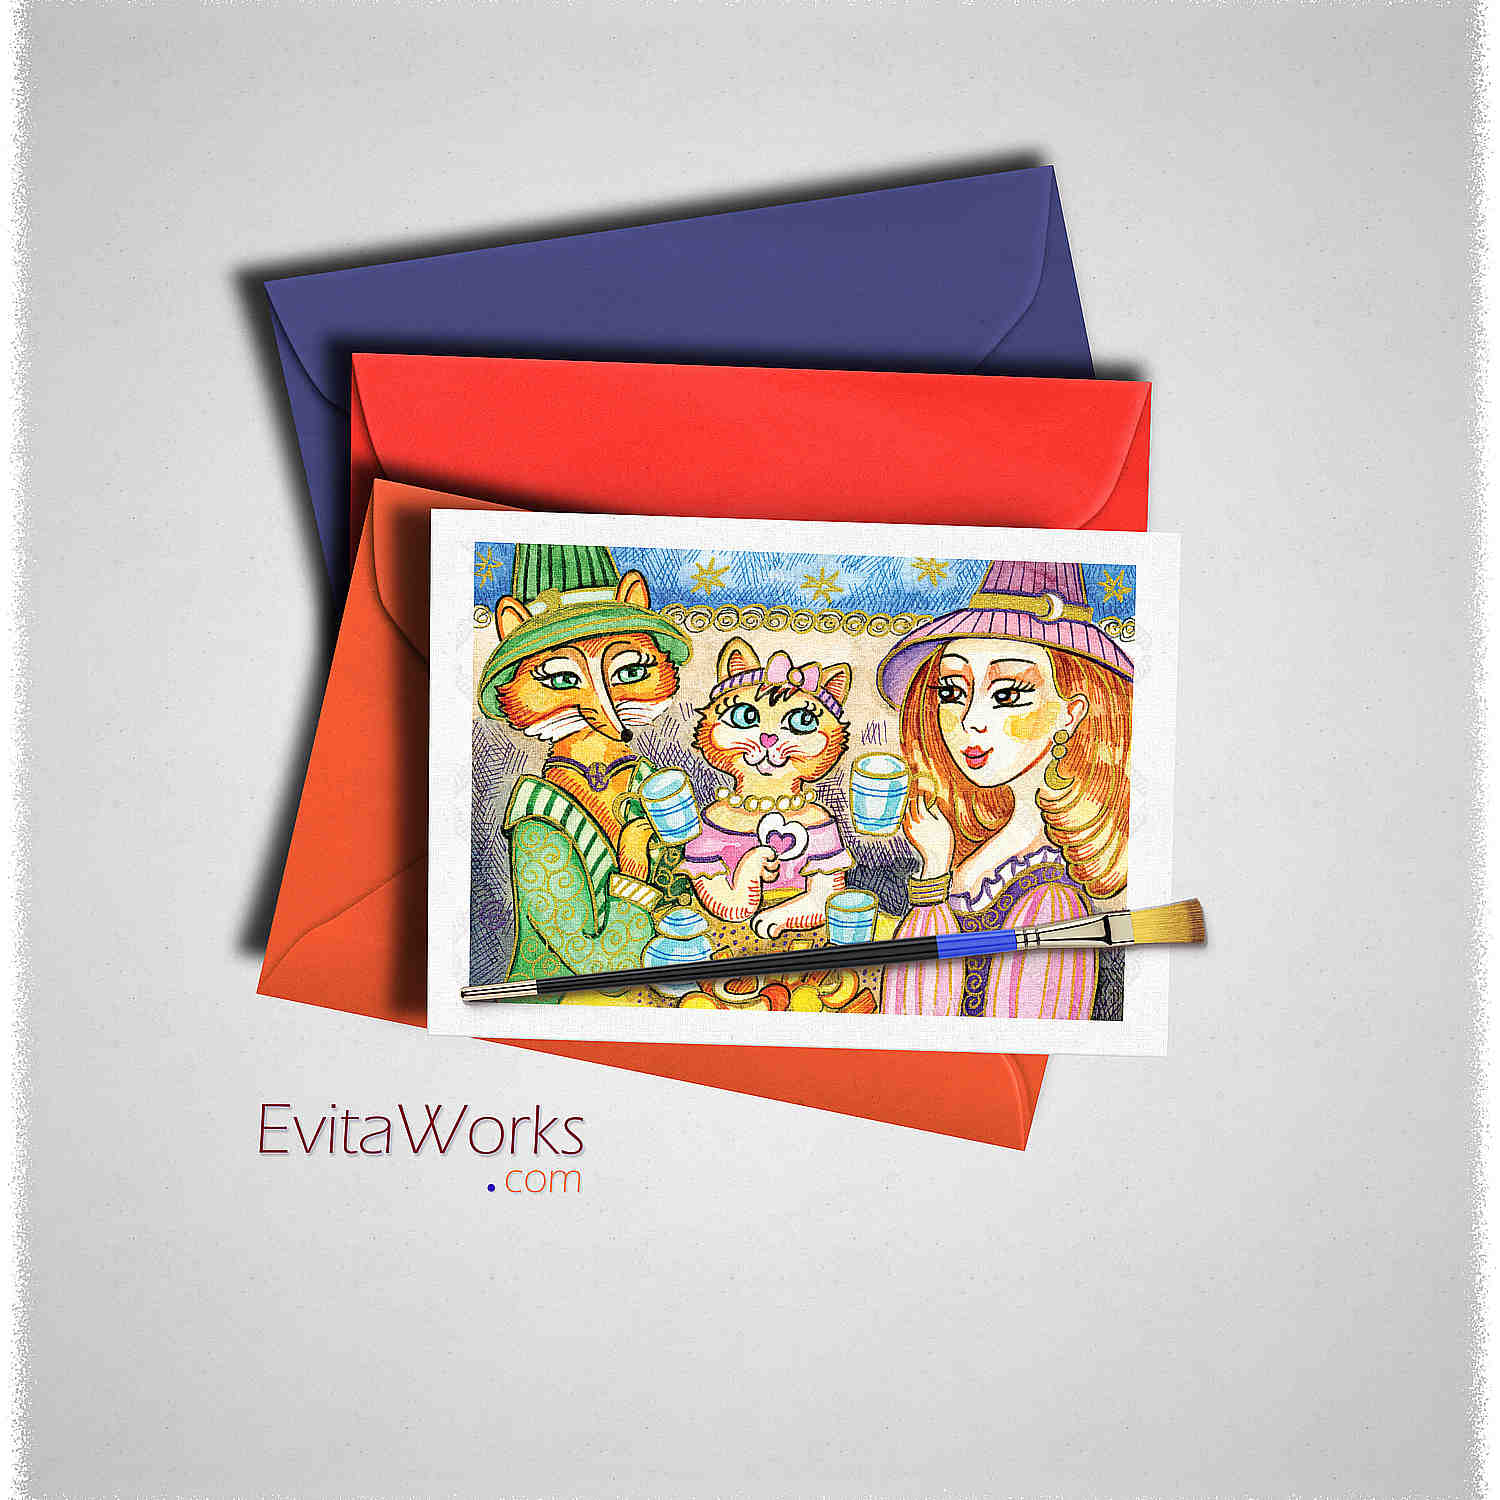 ao witch 30 cd ~ EvitaWorks